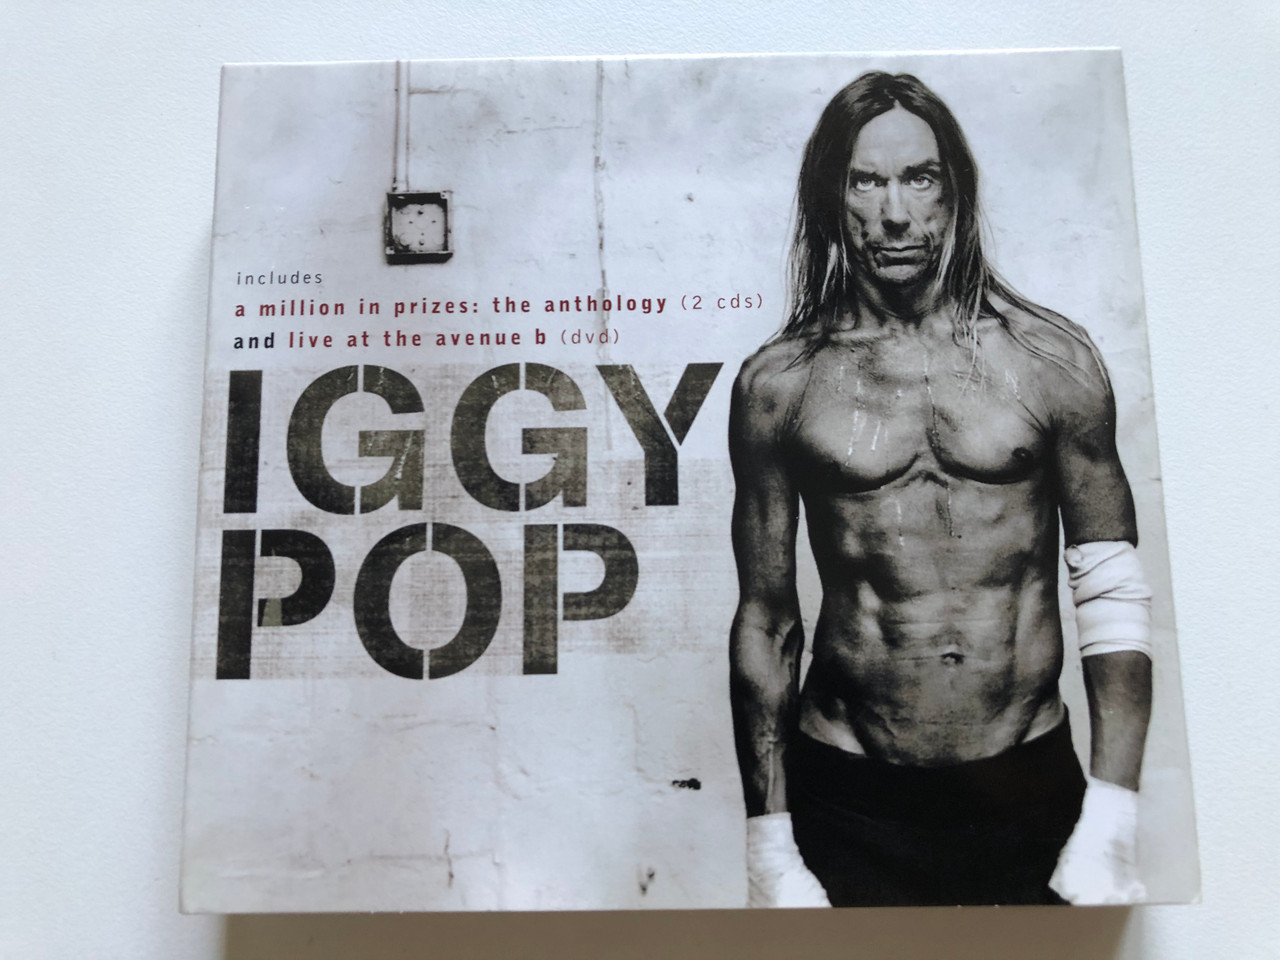 Iggy Pop – includes: A Million In Prizes: The Anthology (2 cds) and Live at  the Avenue B (dvd) / Virgin 2x Audio CD + DVD Video 2007 / 5099951137625 -  bibleinmylanguage